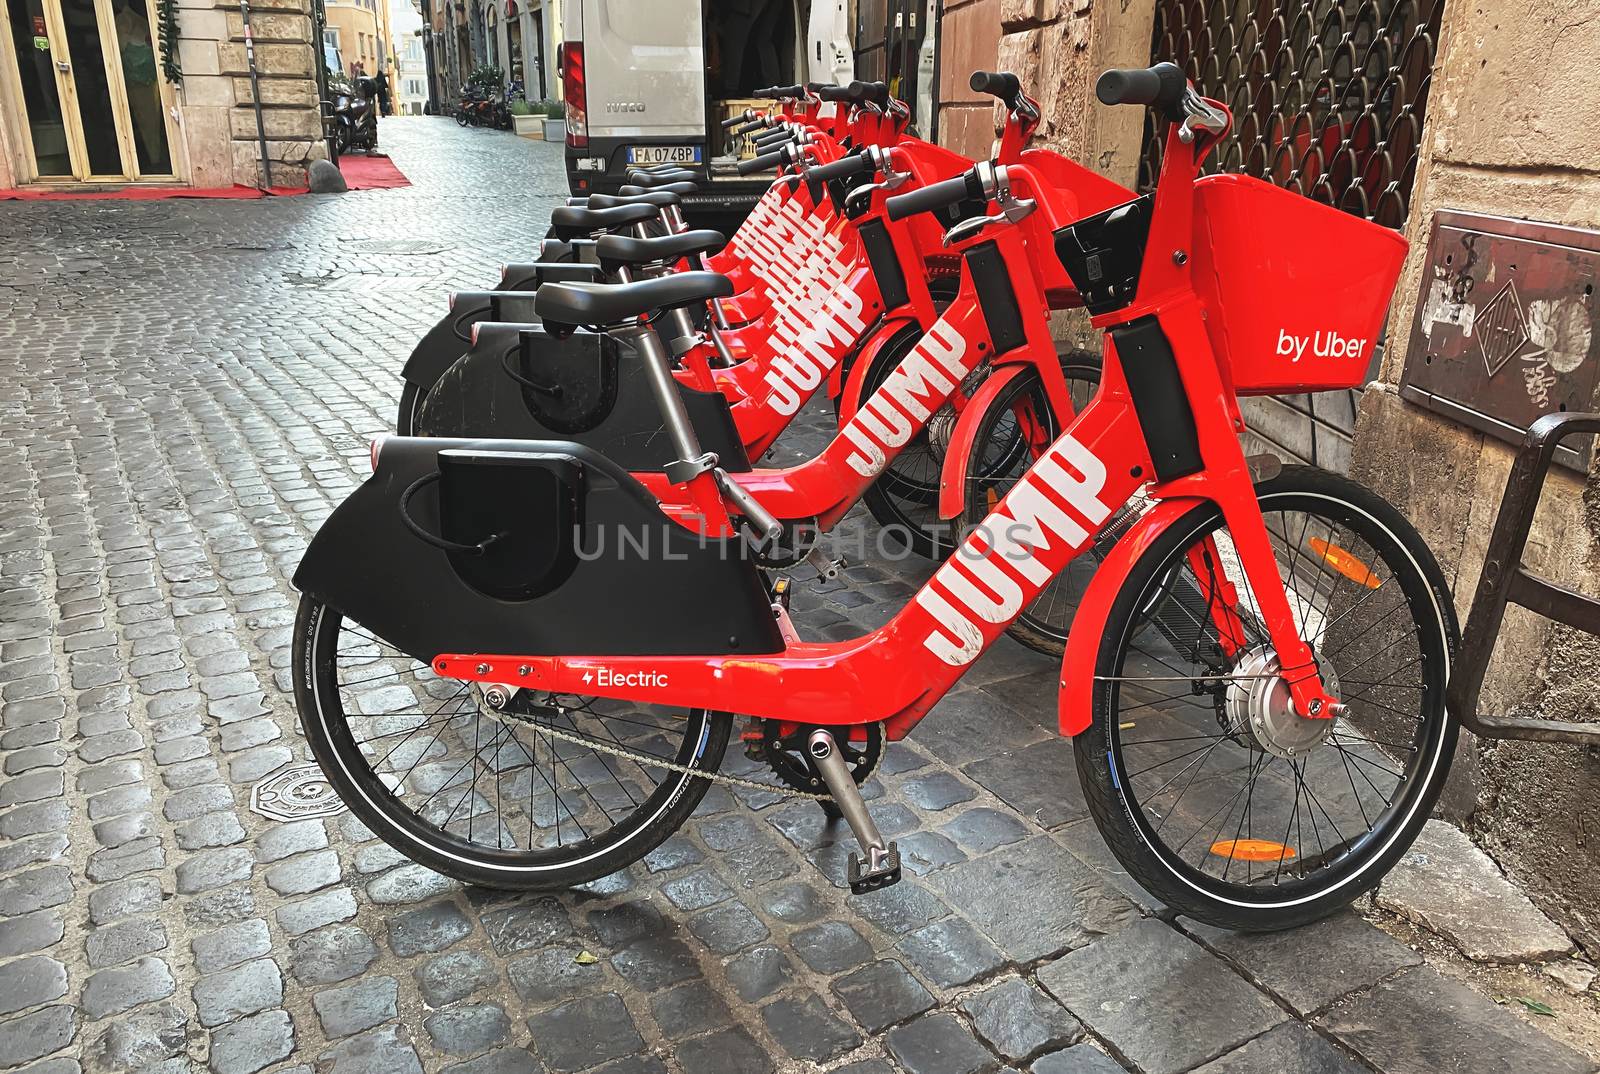 Rome, Italy, January 8, 2020: a group of red electric bicycles of the Uber Jump bike-sharing service park in a street in the center of Rome. Concept of sustainable mobility and eco-sustainable